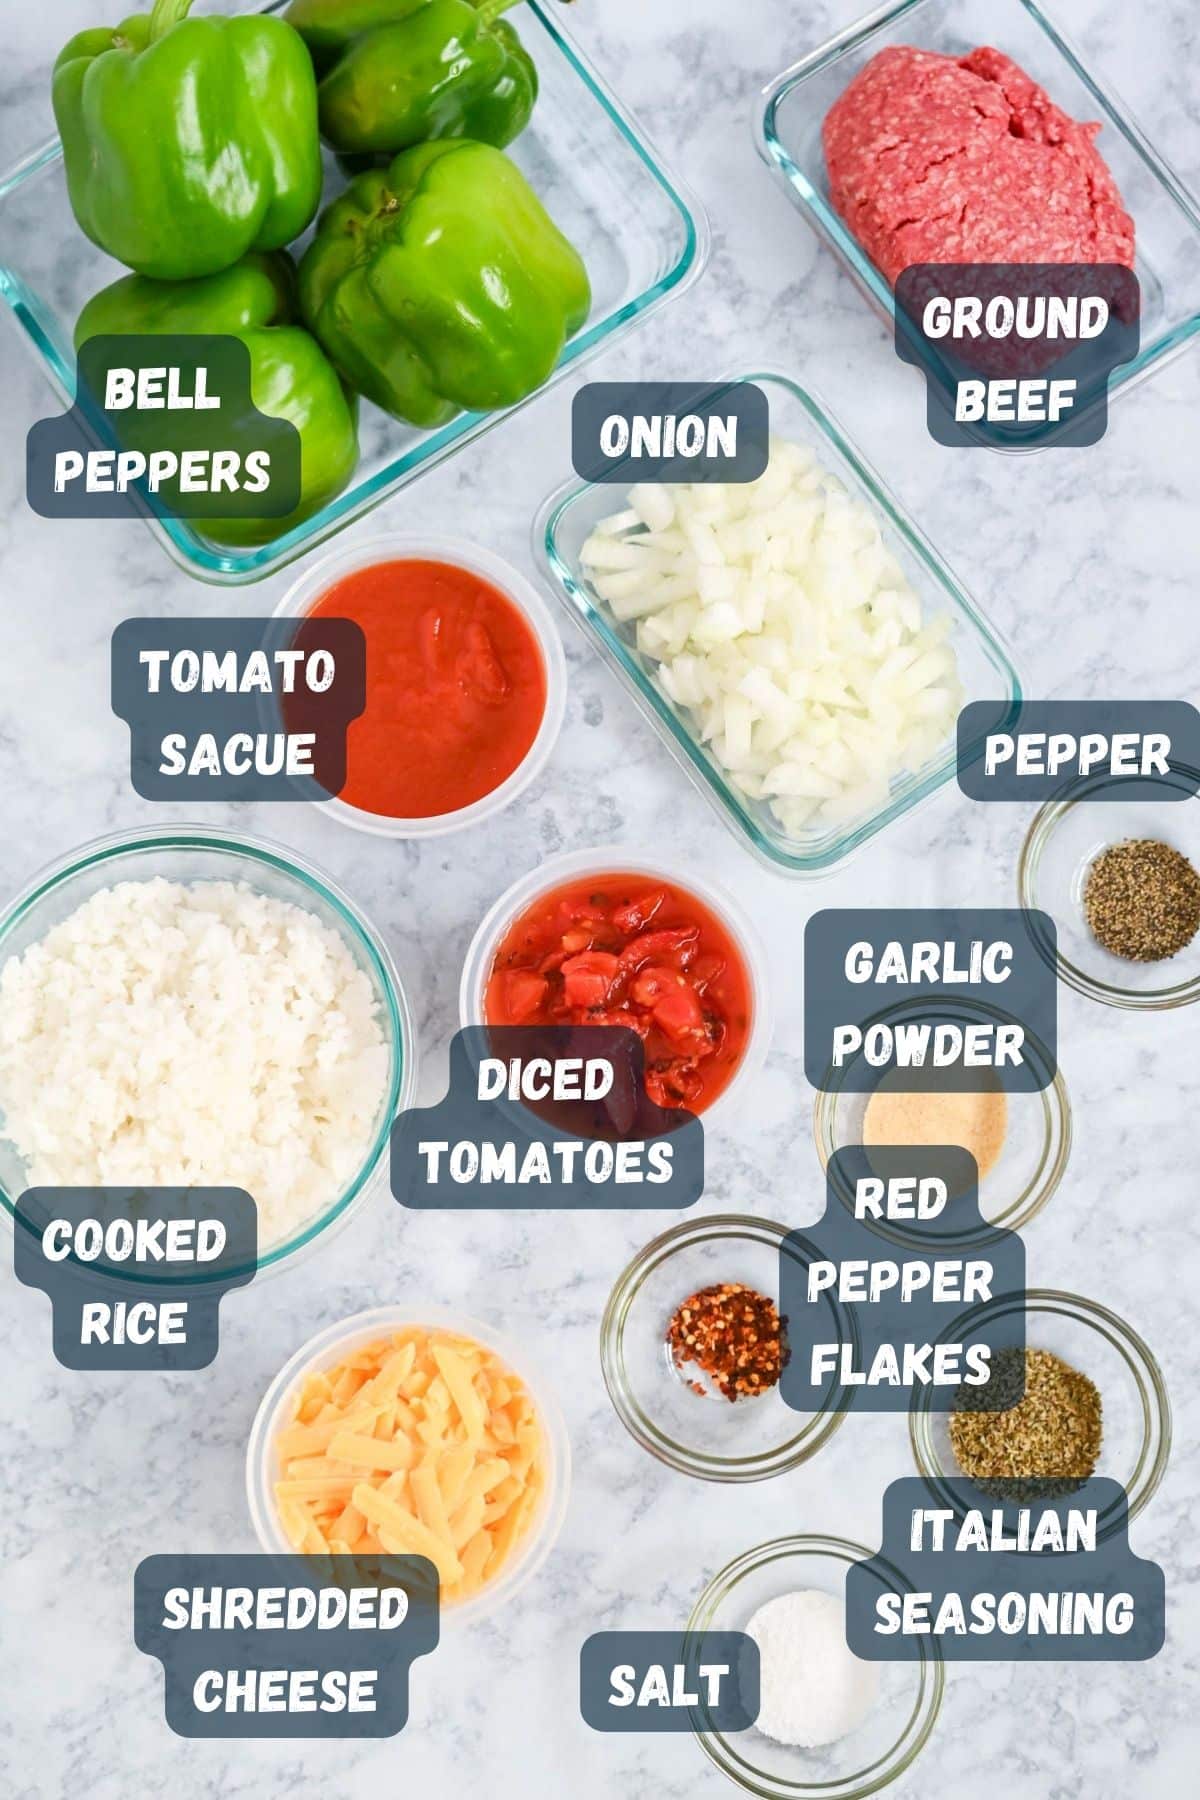 Ingredients for stuffed bell peppers, including bell peppers, ground beef, onion, tomato sauce, cooked rice, and spices.